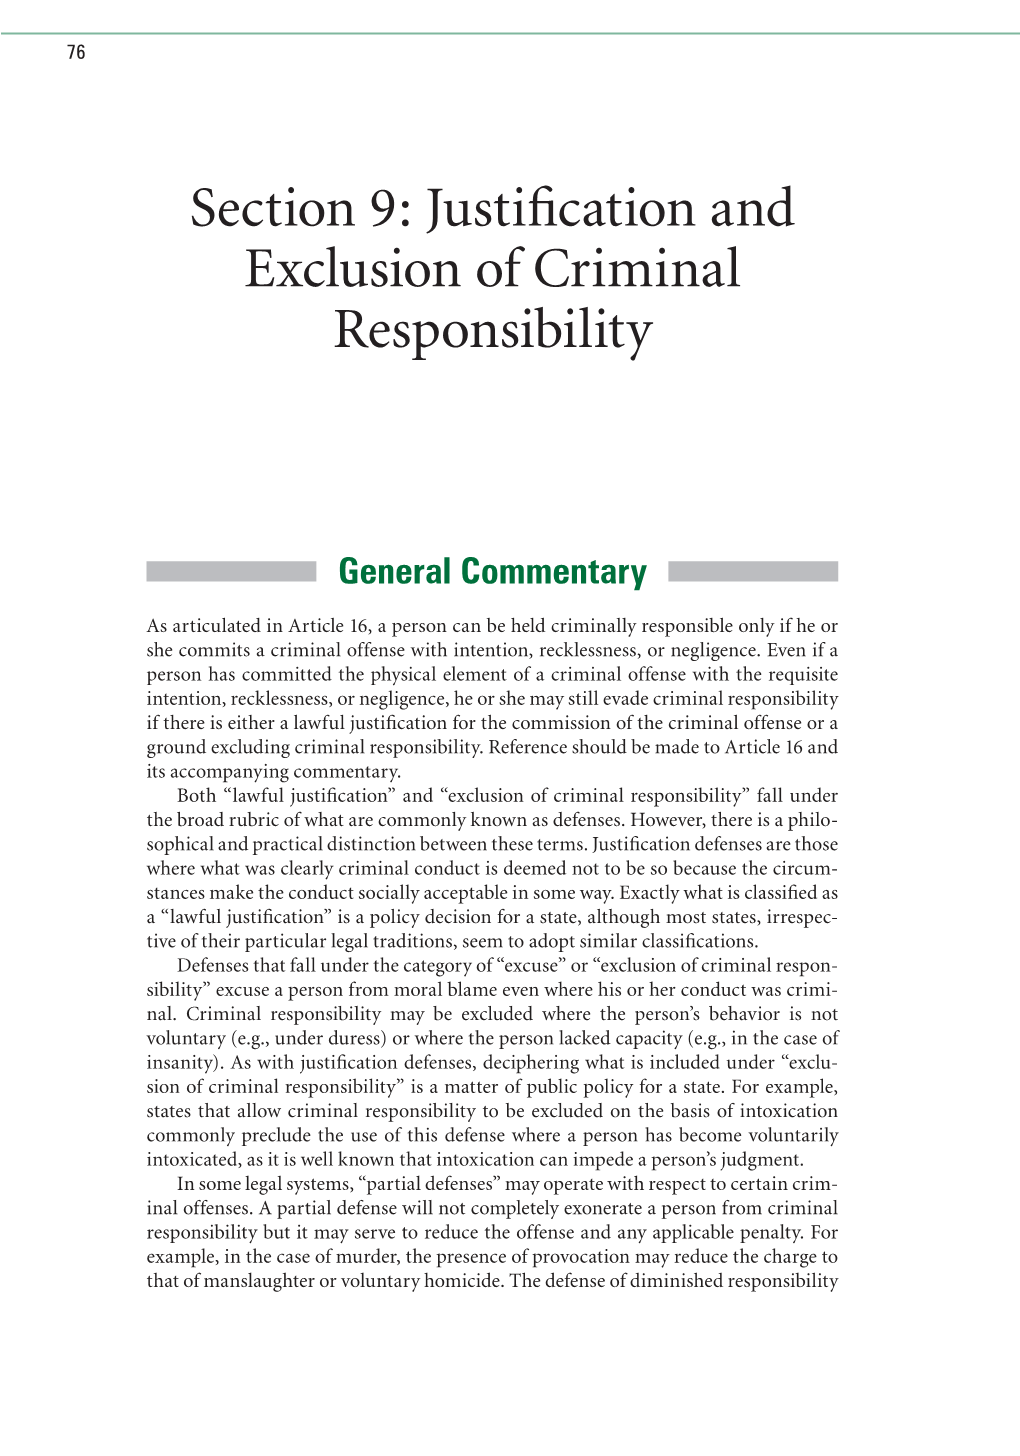 Section 9: Justification and Exclusion of Criminal Responsibility